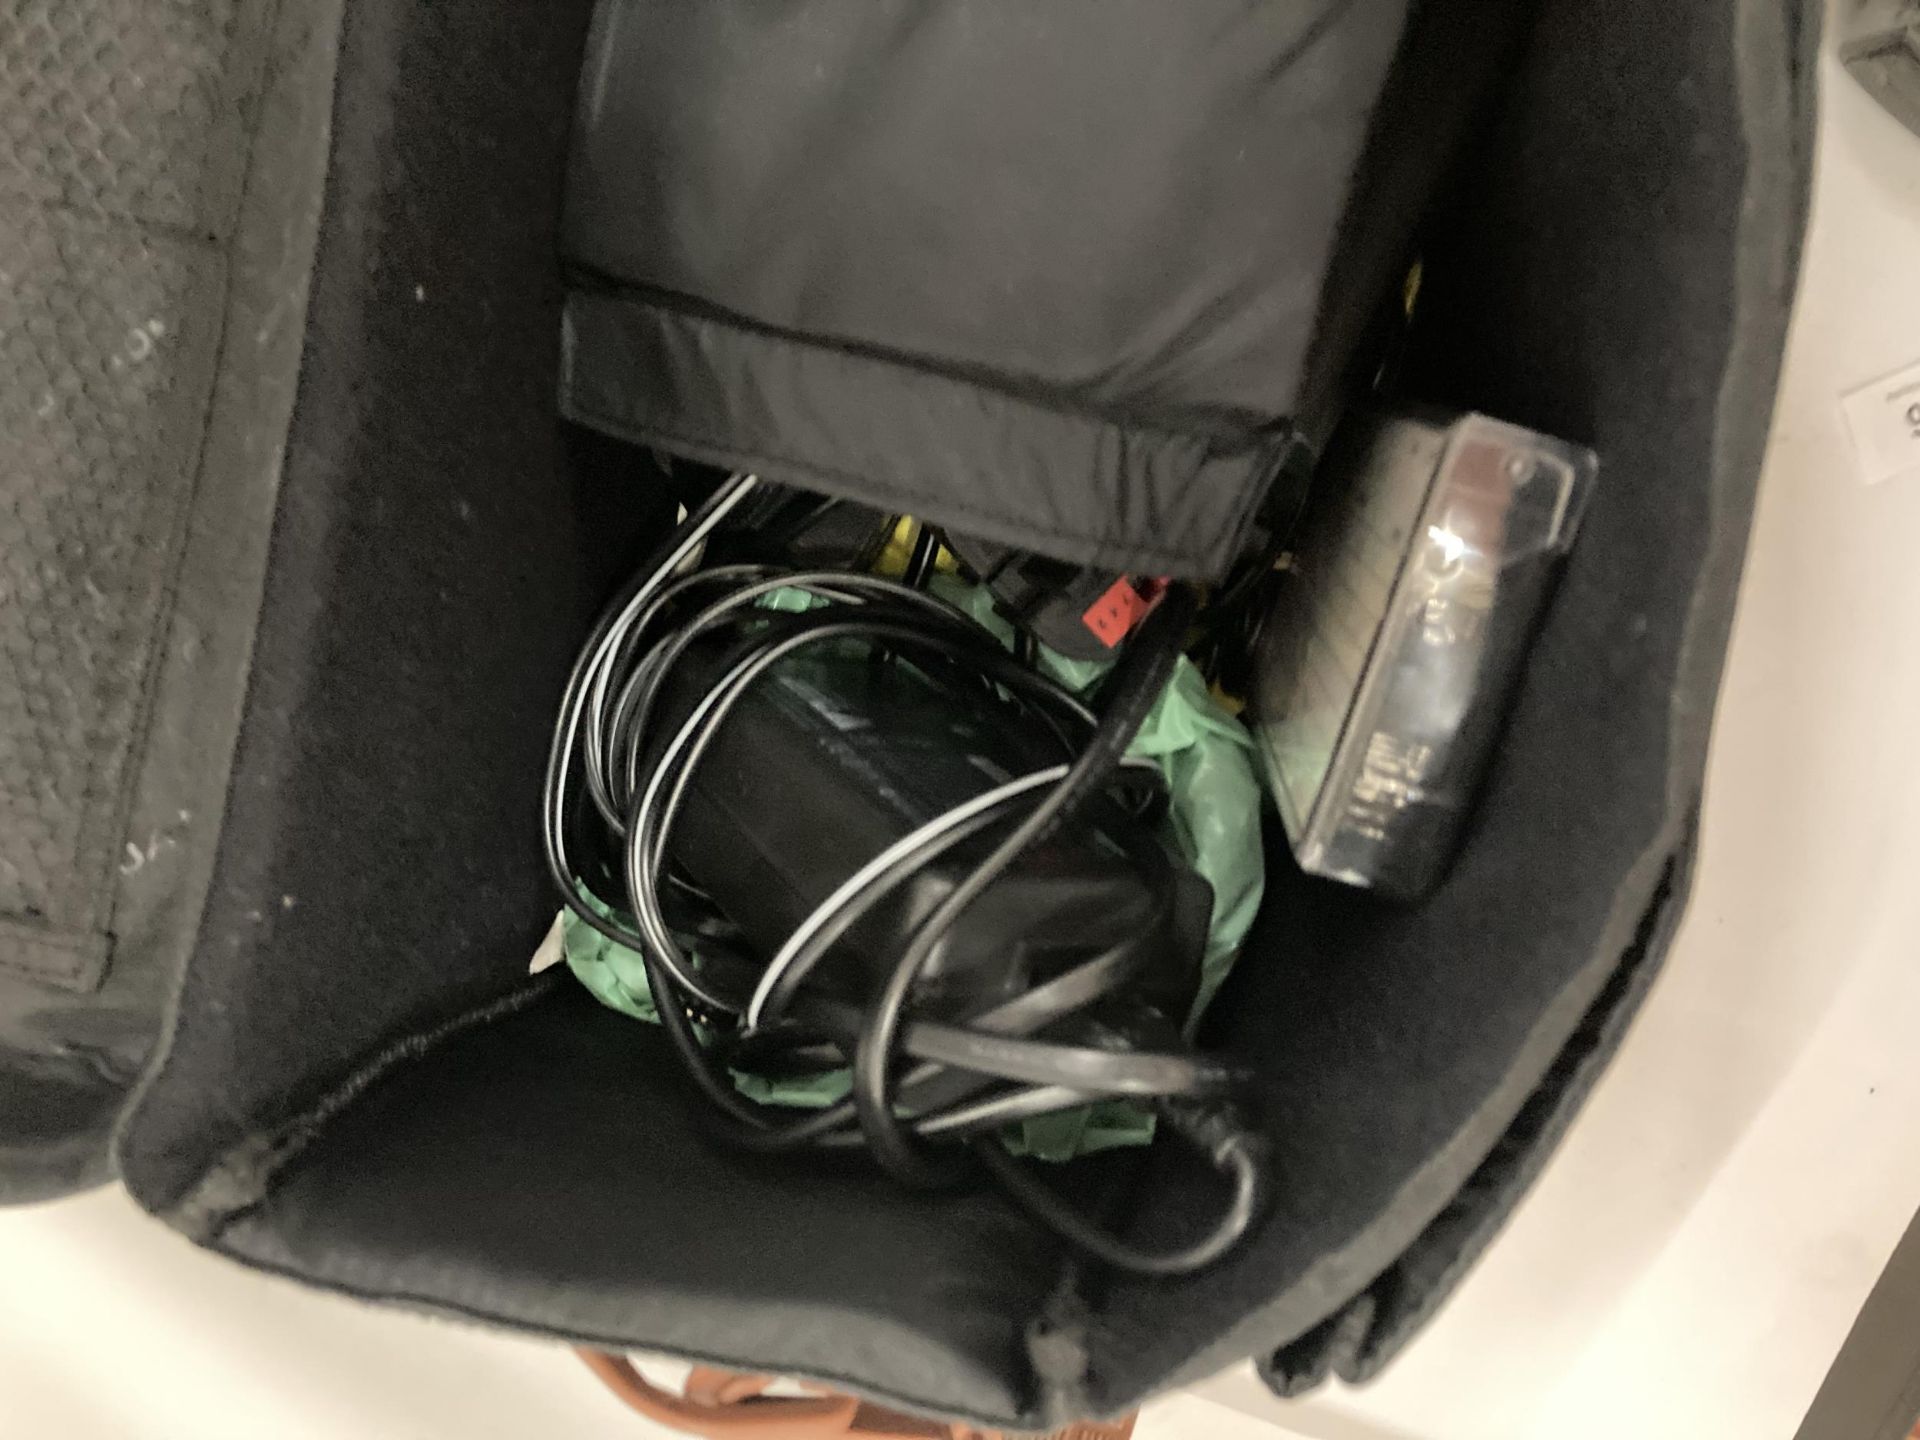 A SONY VIDEO CAMERA RECORDER WITH ACCESSORIES IN A VANGUARD BAG - Image 9 of 10